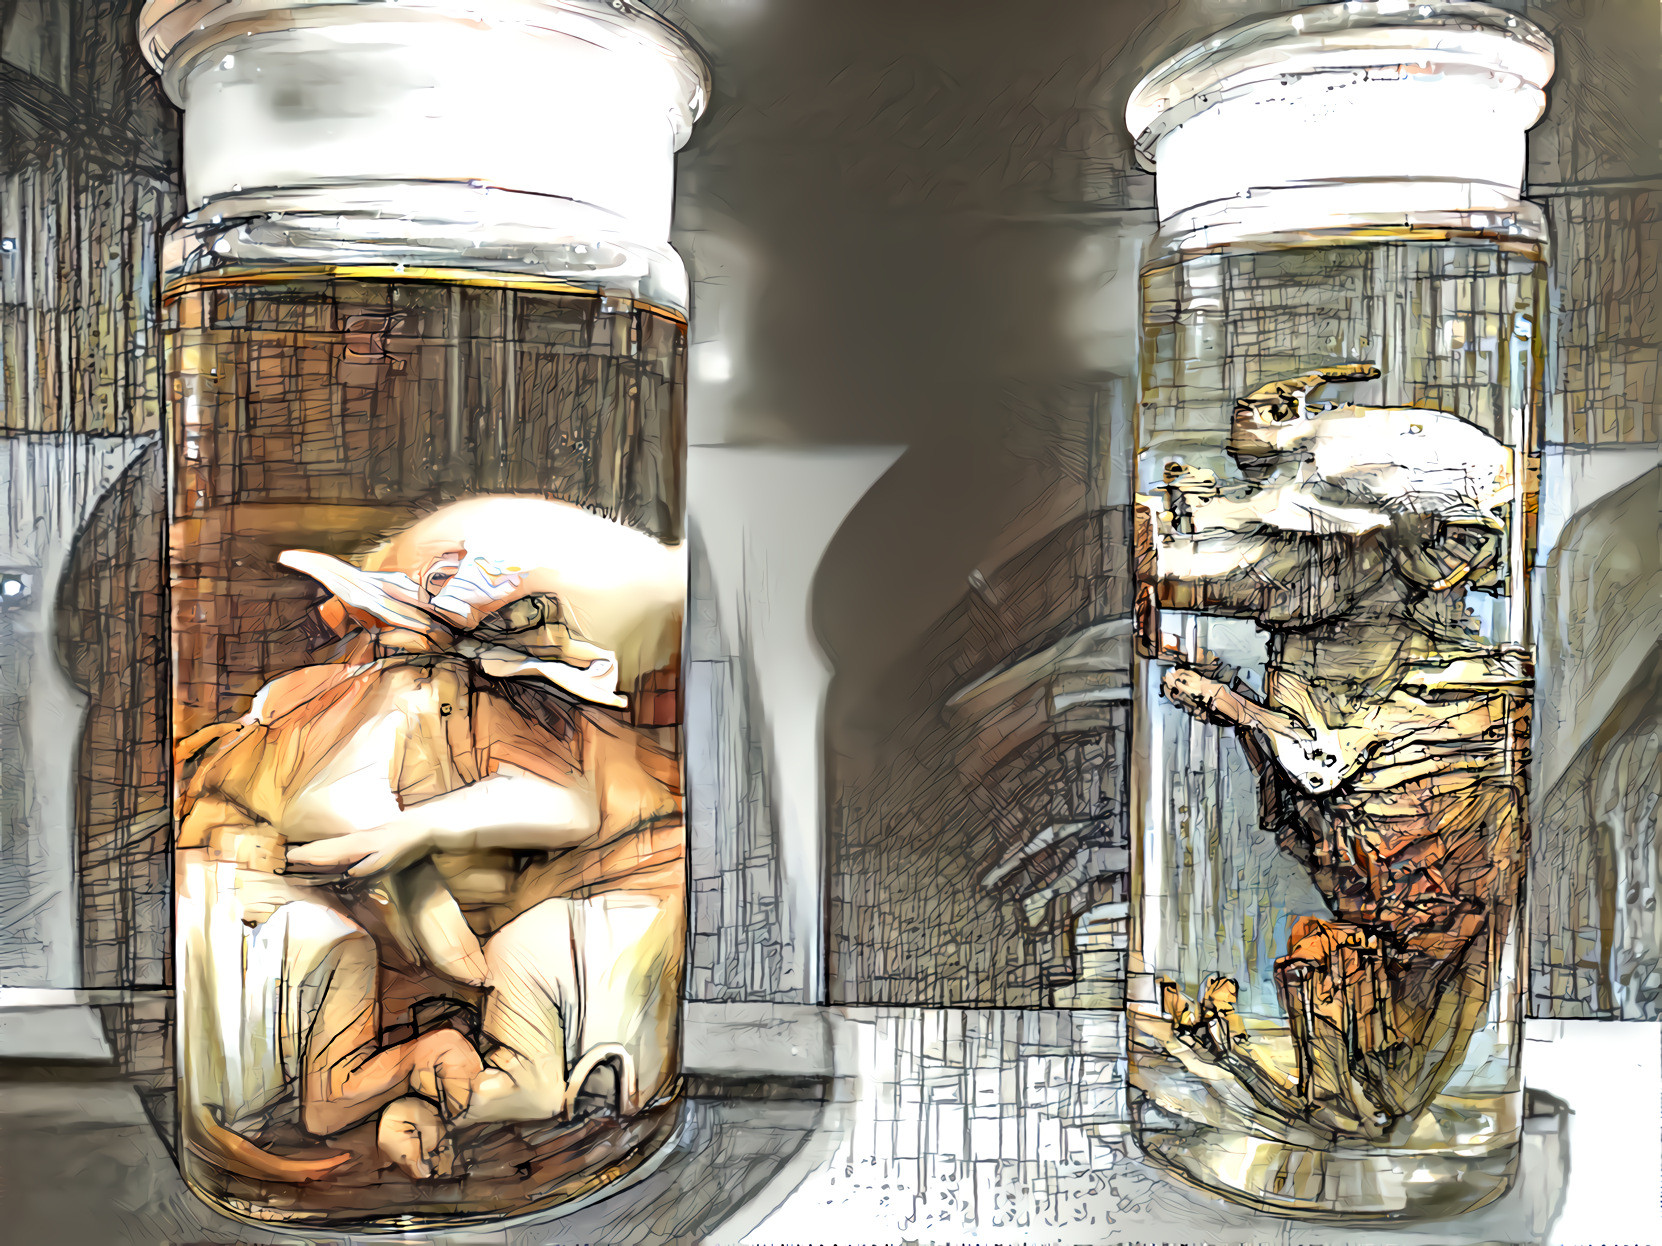 Preserved life